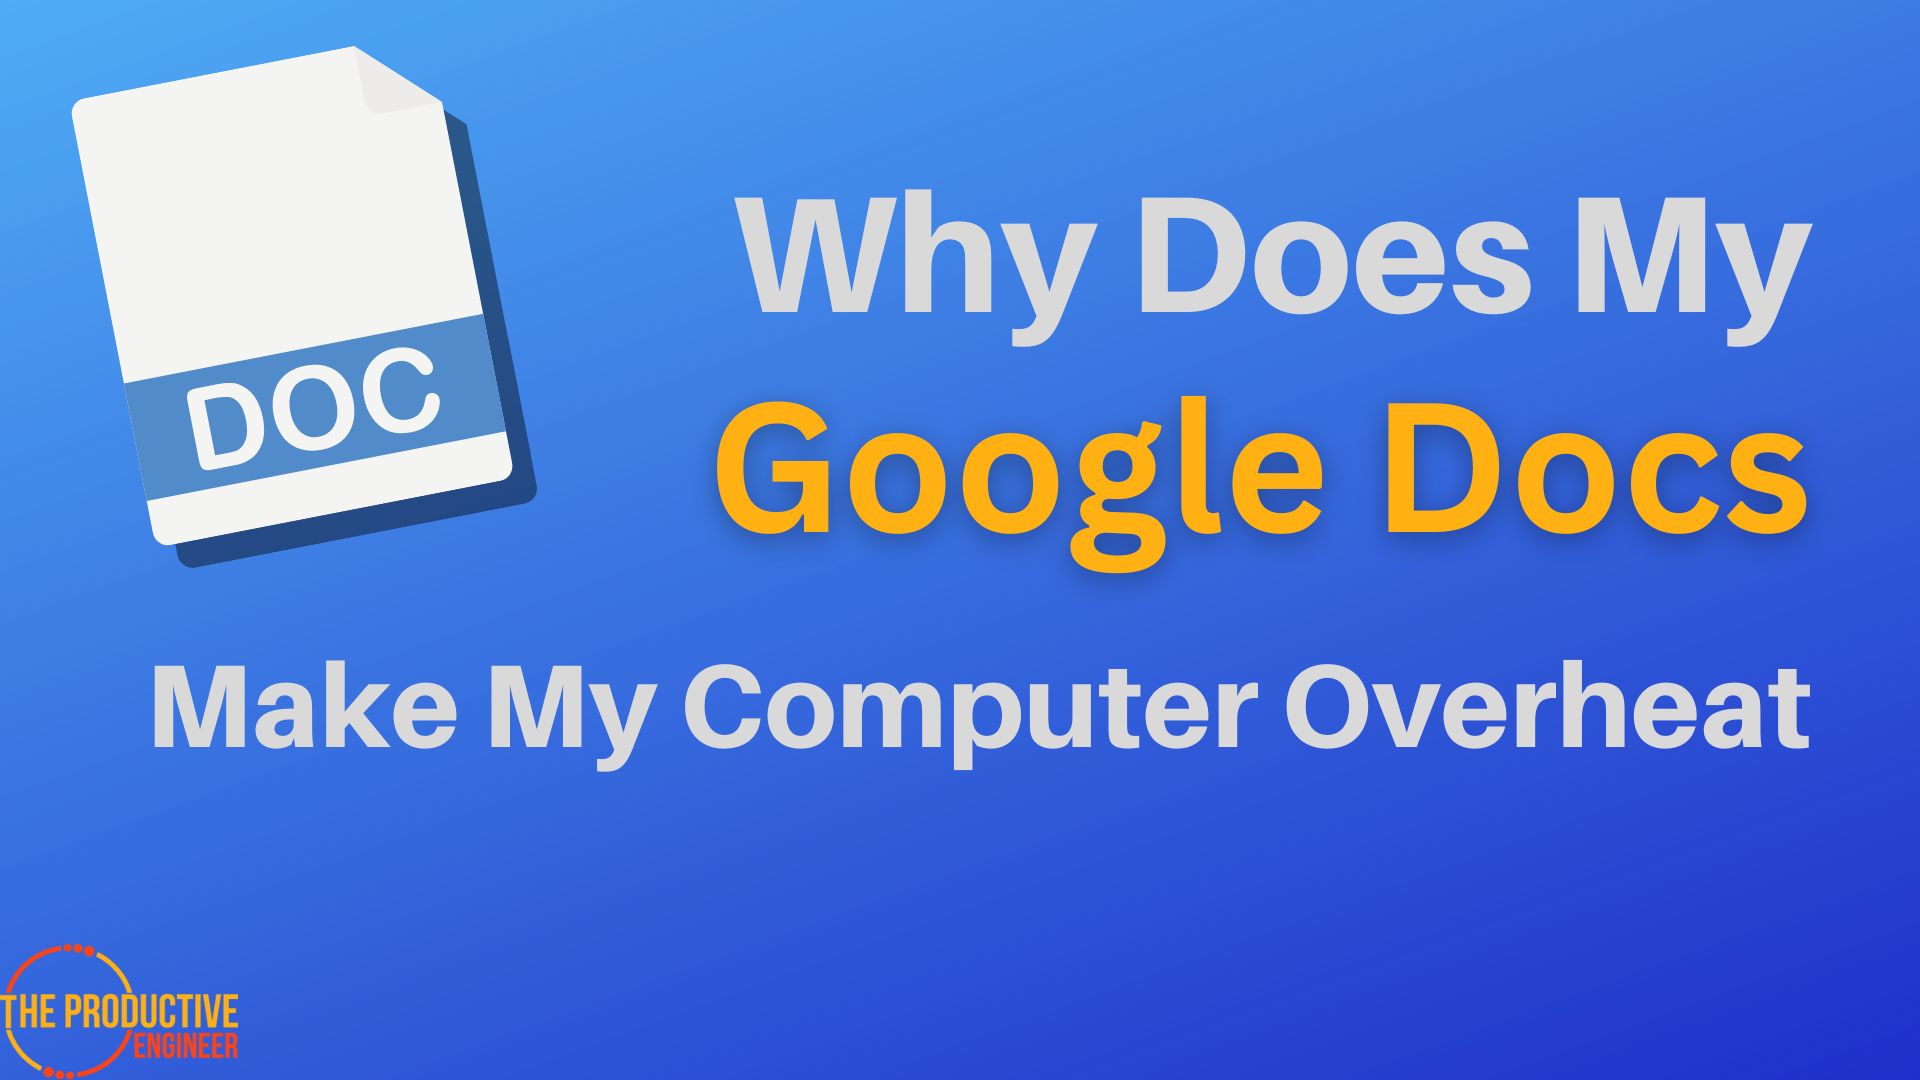 Why Does Google Docs Make My Computer Overheat